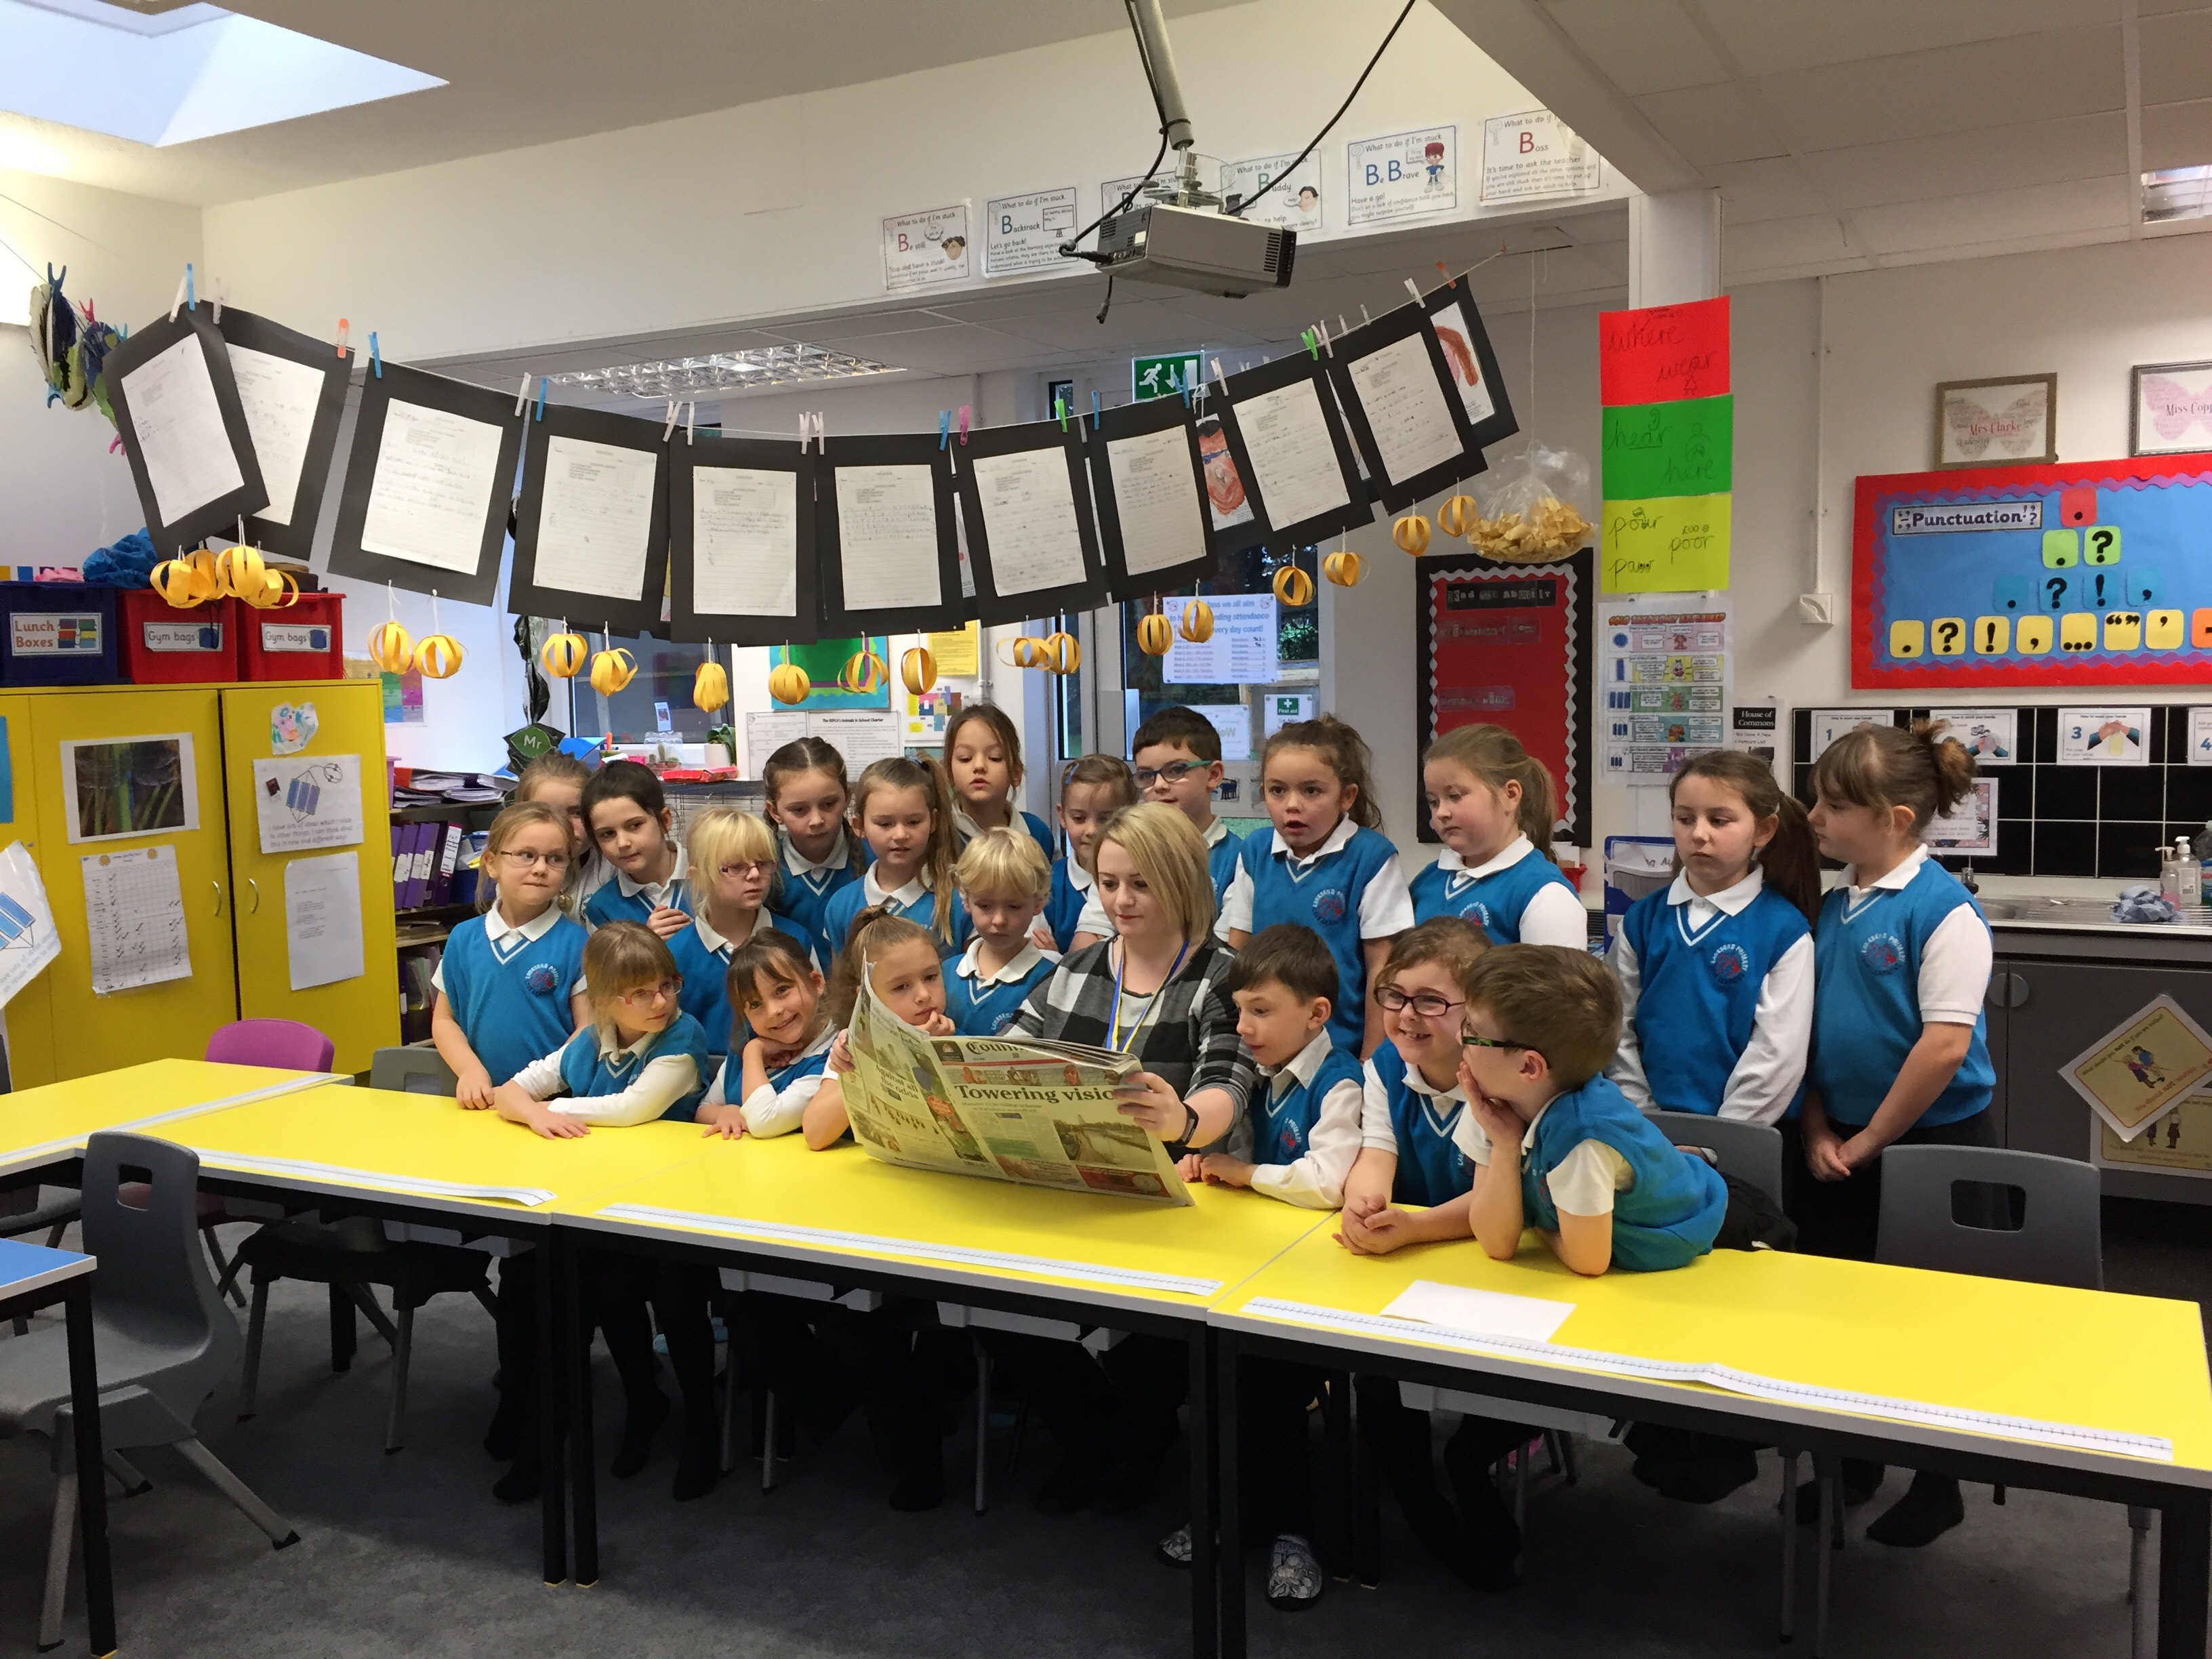 News reporter visits Year 2